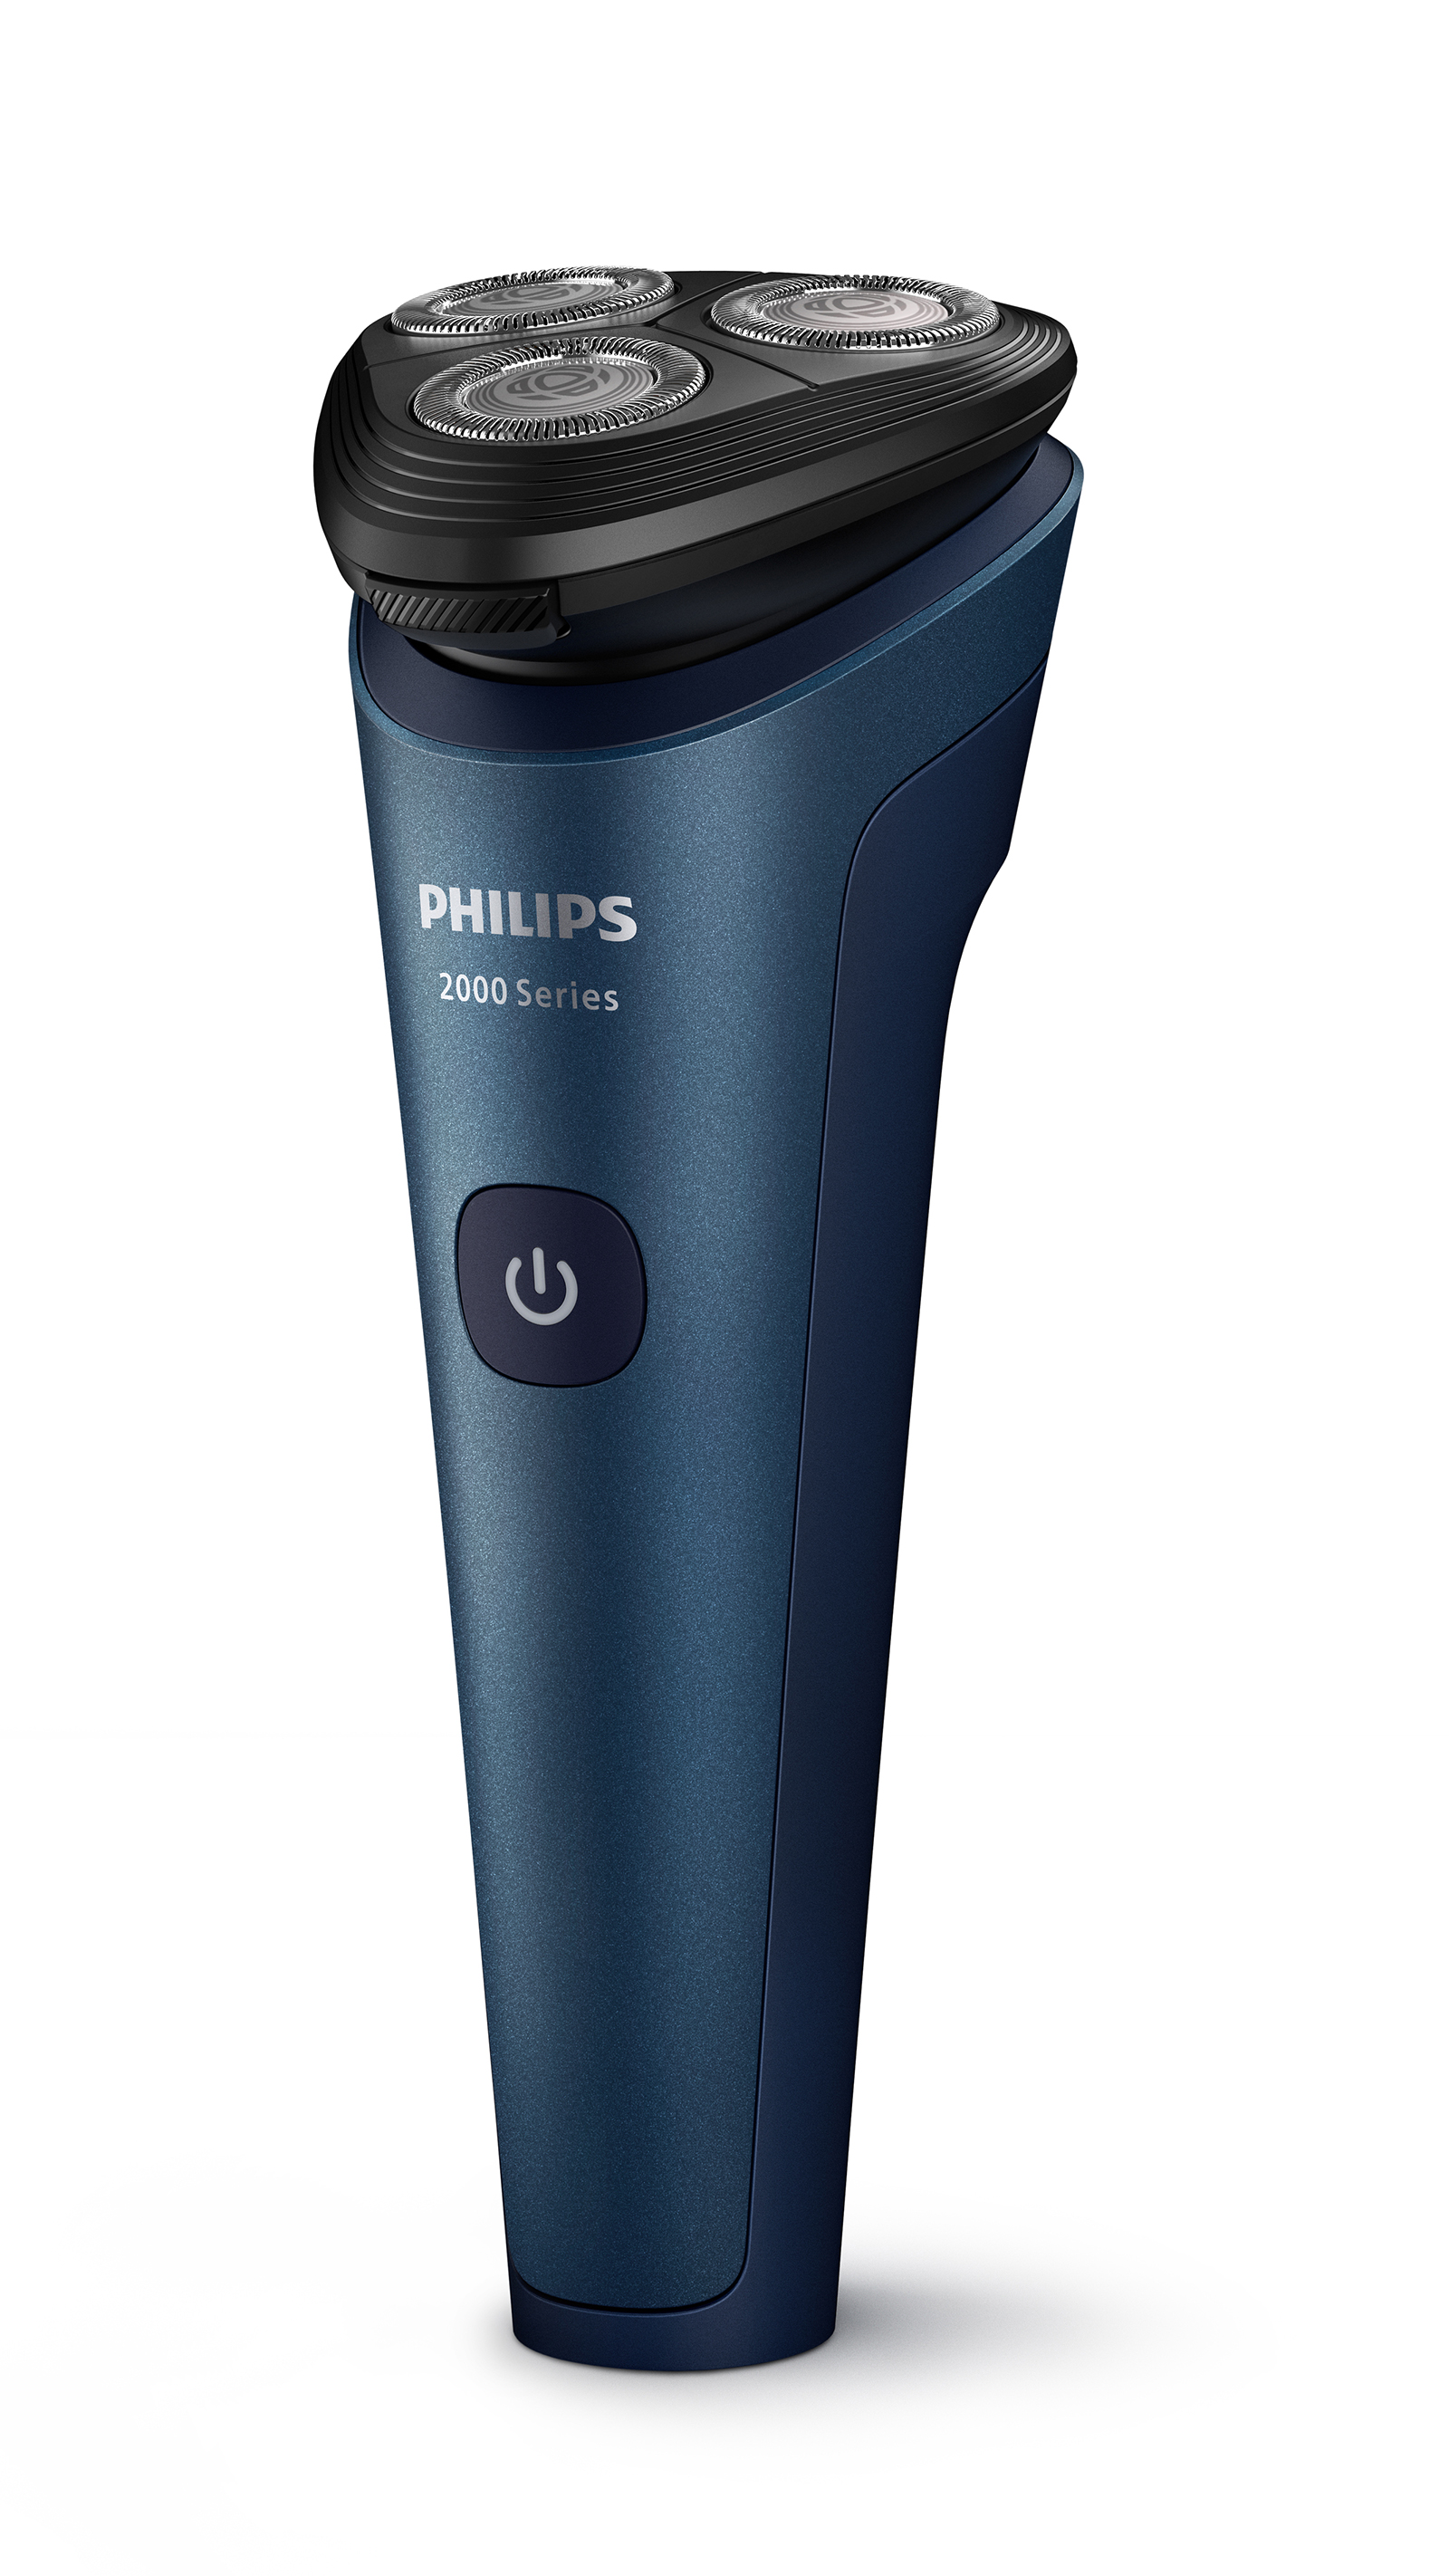 Philips Electronic 3 header shaver-S2000 series